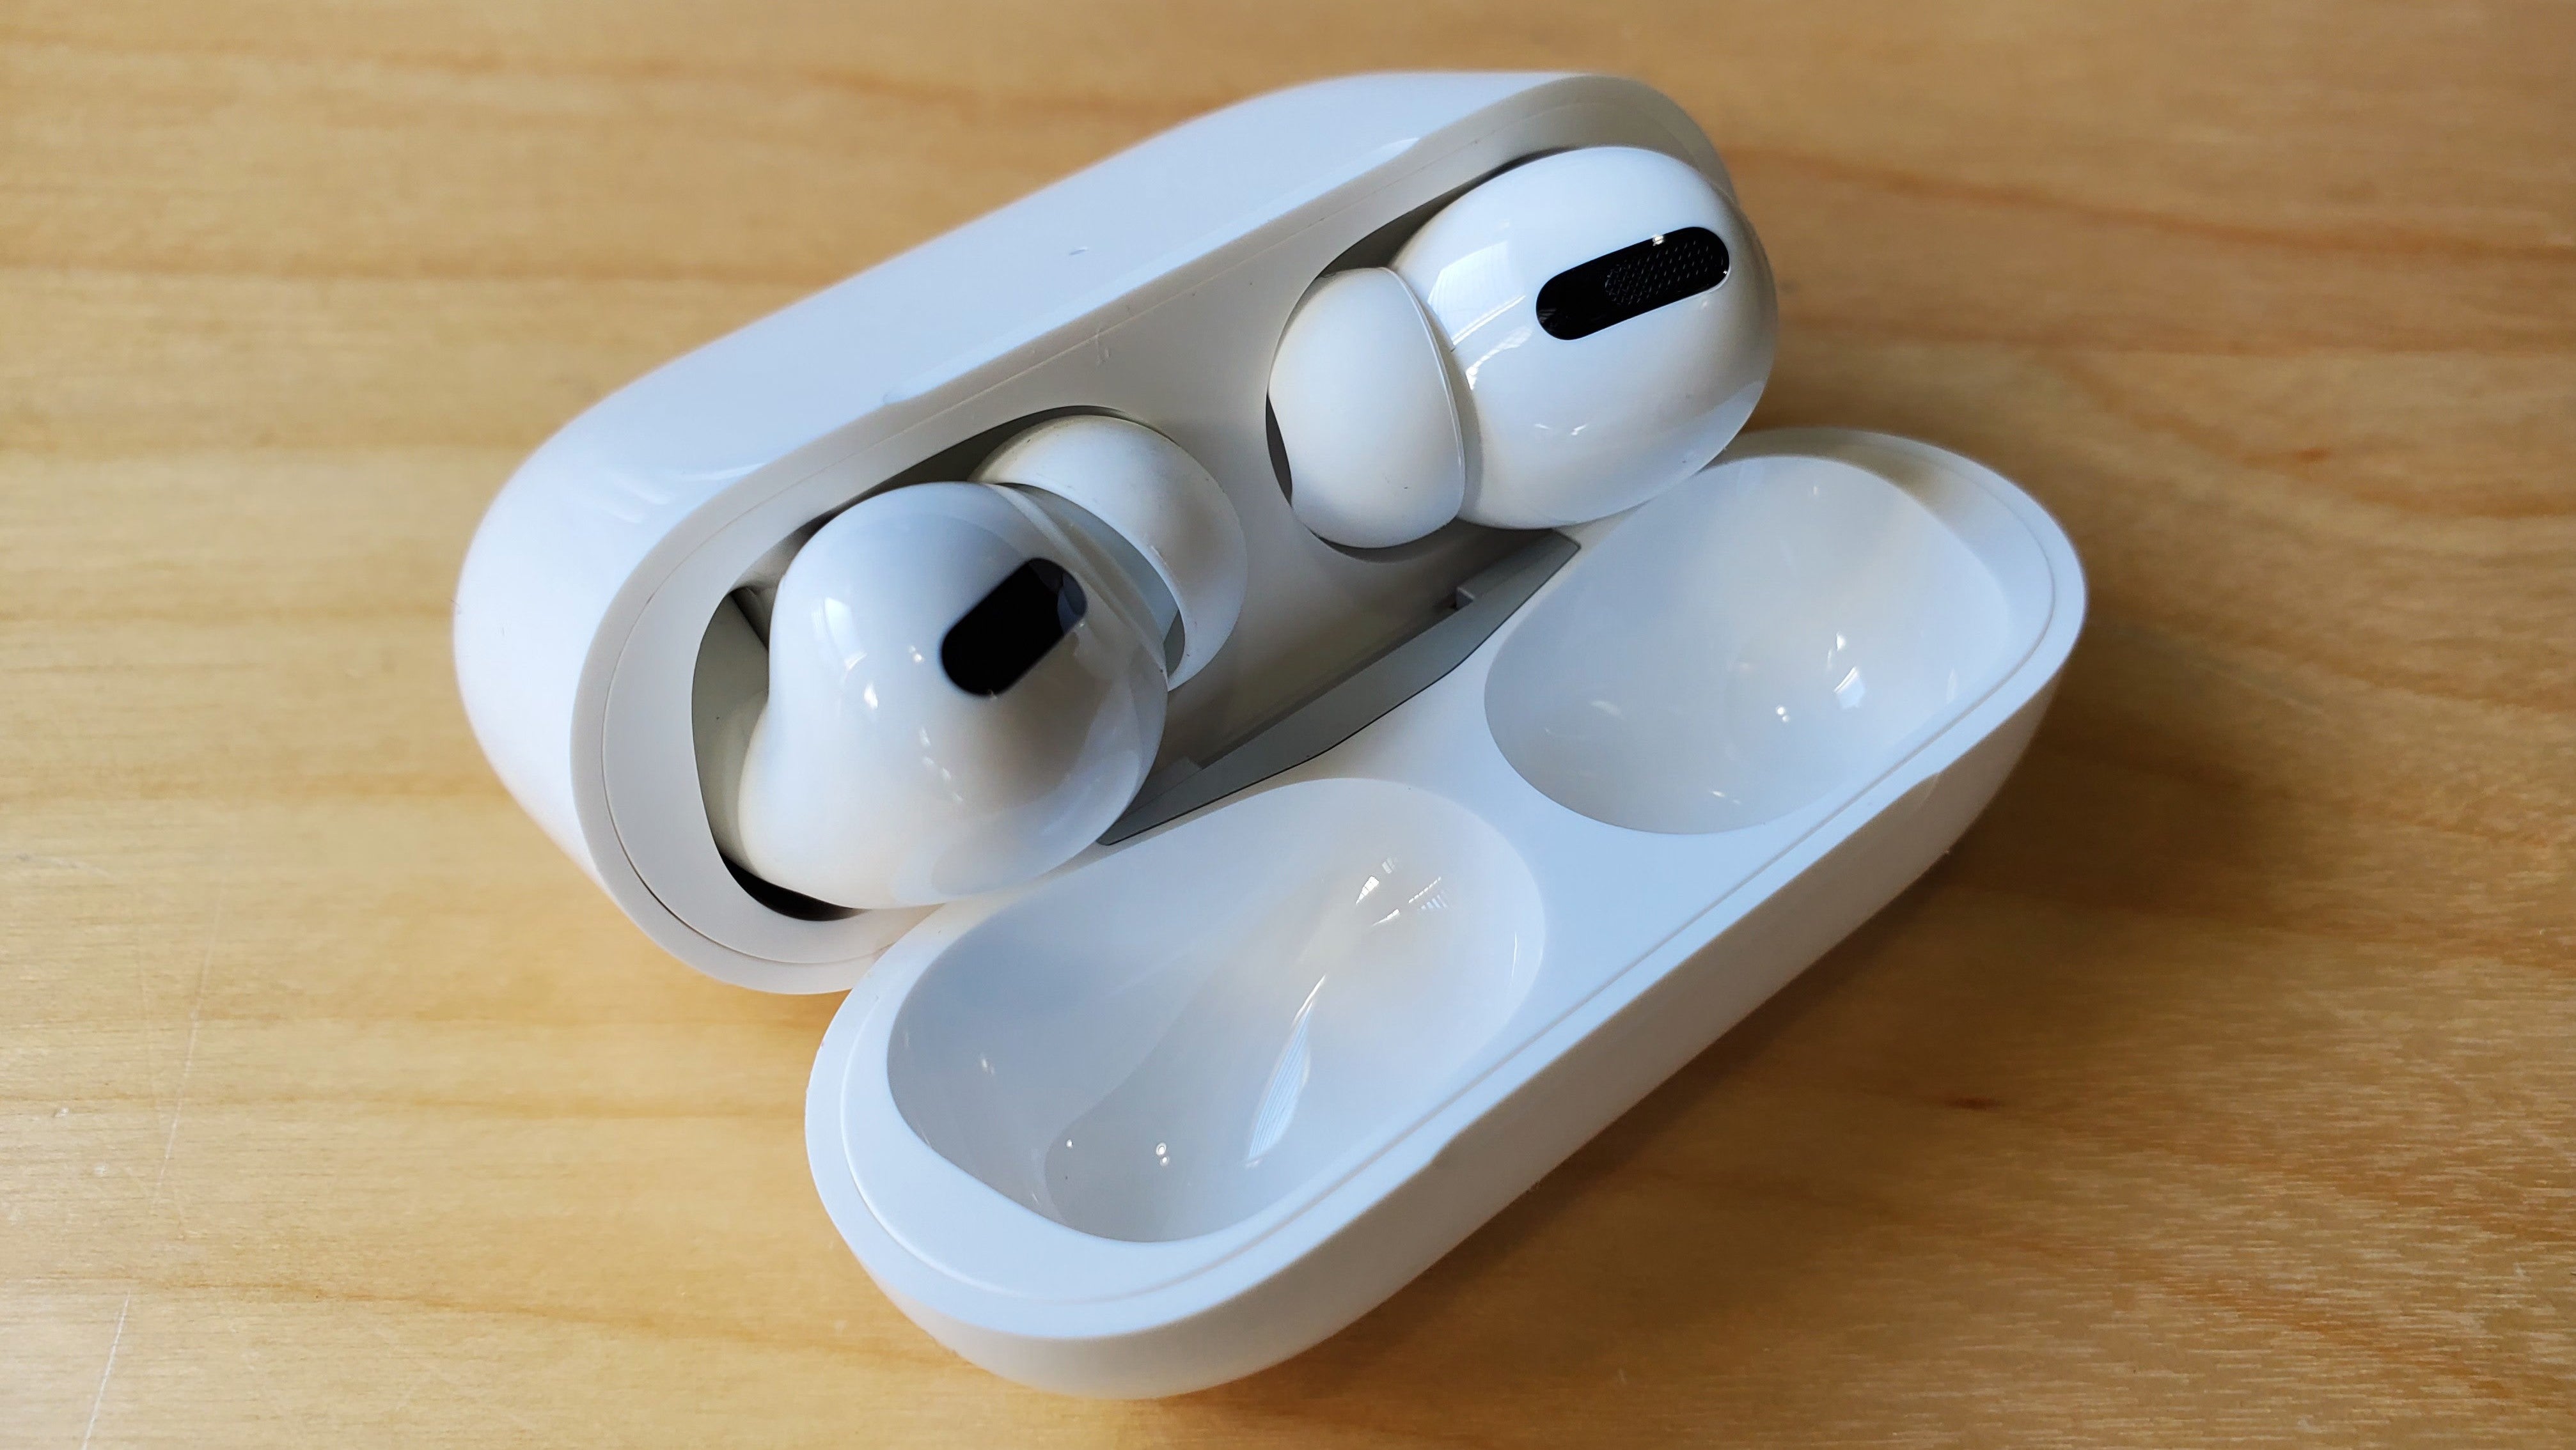 How To Set Up Your Brand-New AirPods Pro